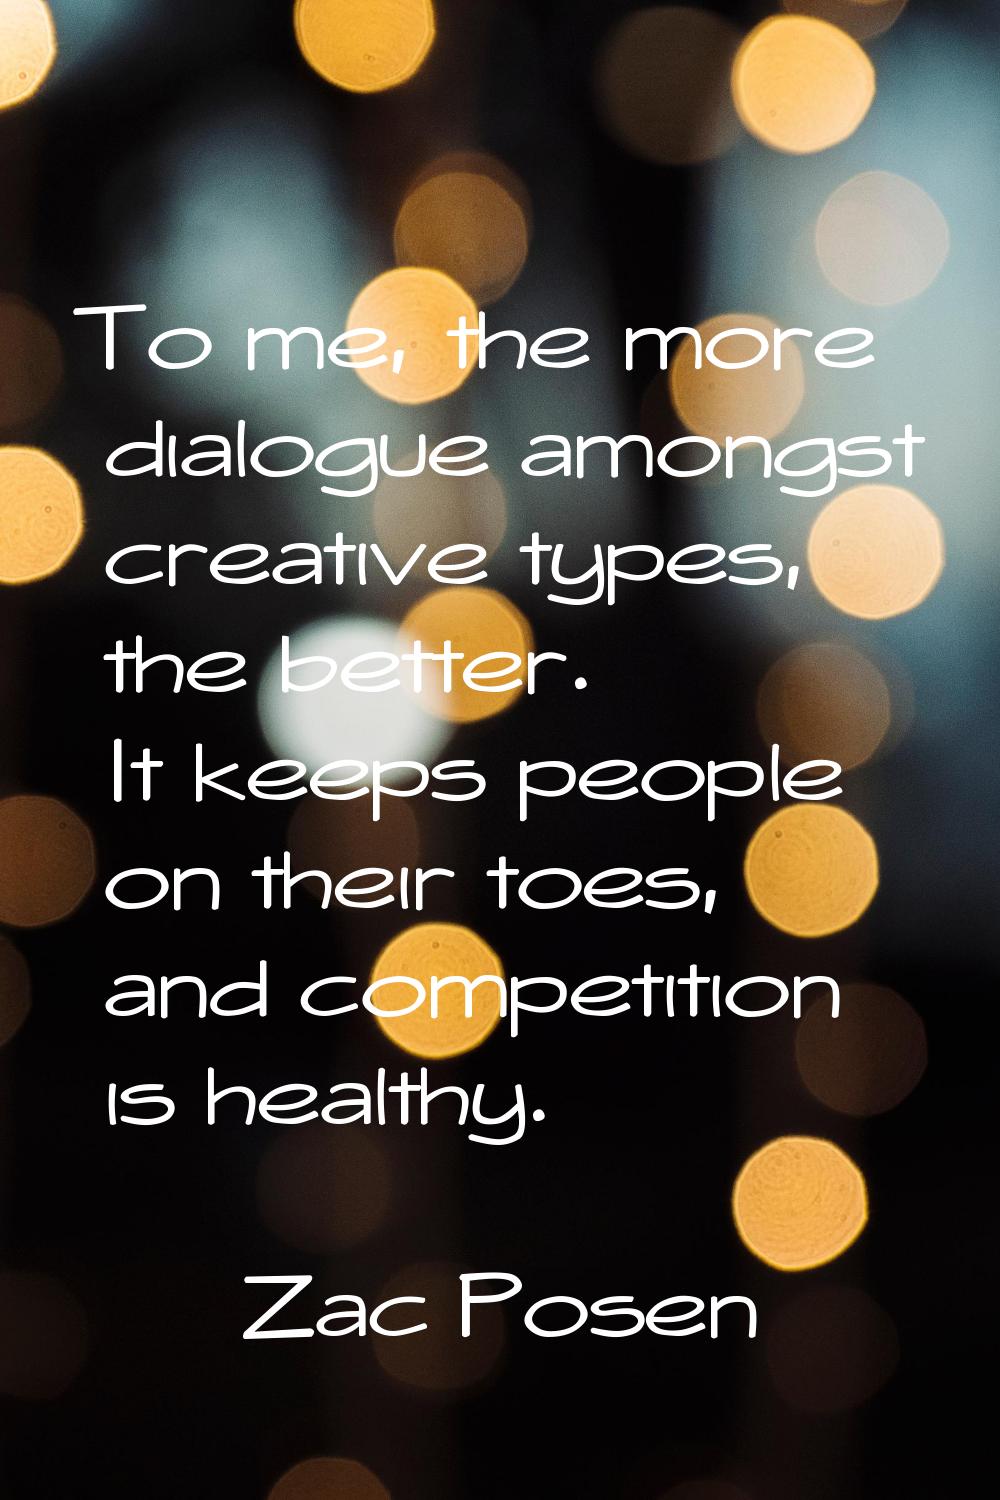 To me, the more dialogue amongst creative types, the better. It keeps people on their toes, and com